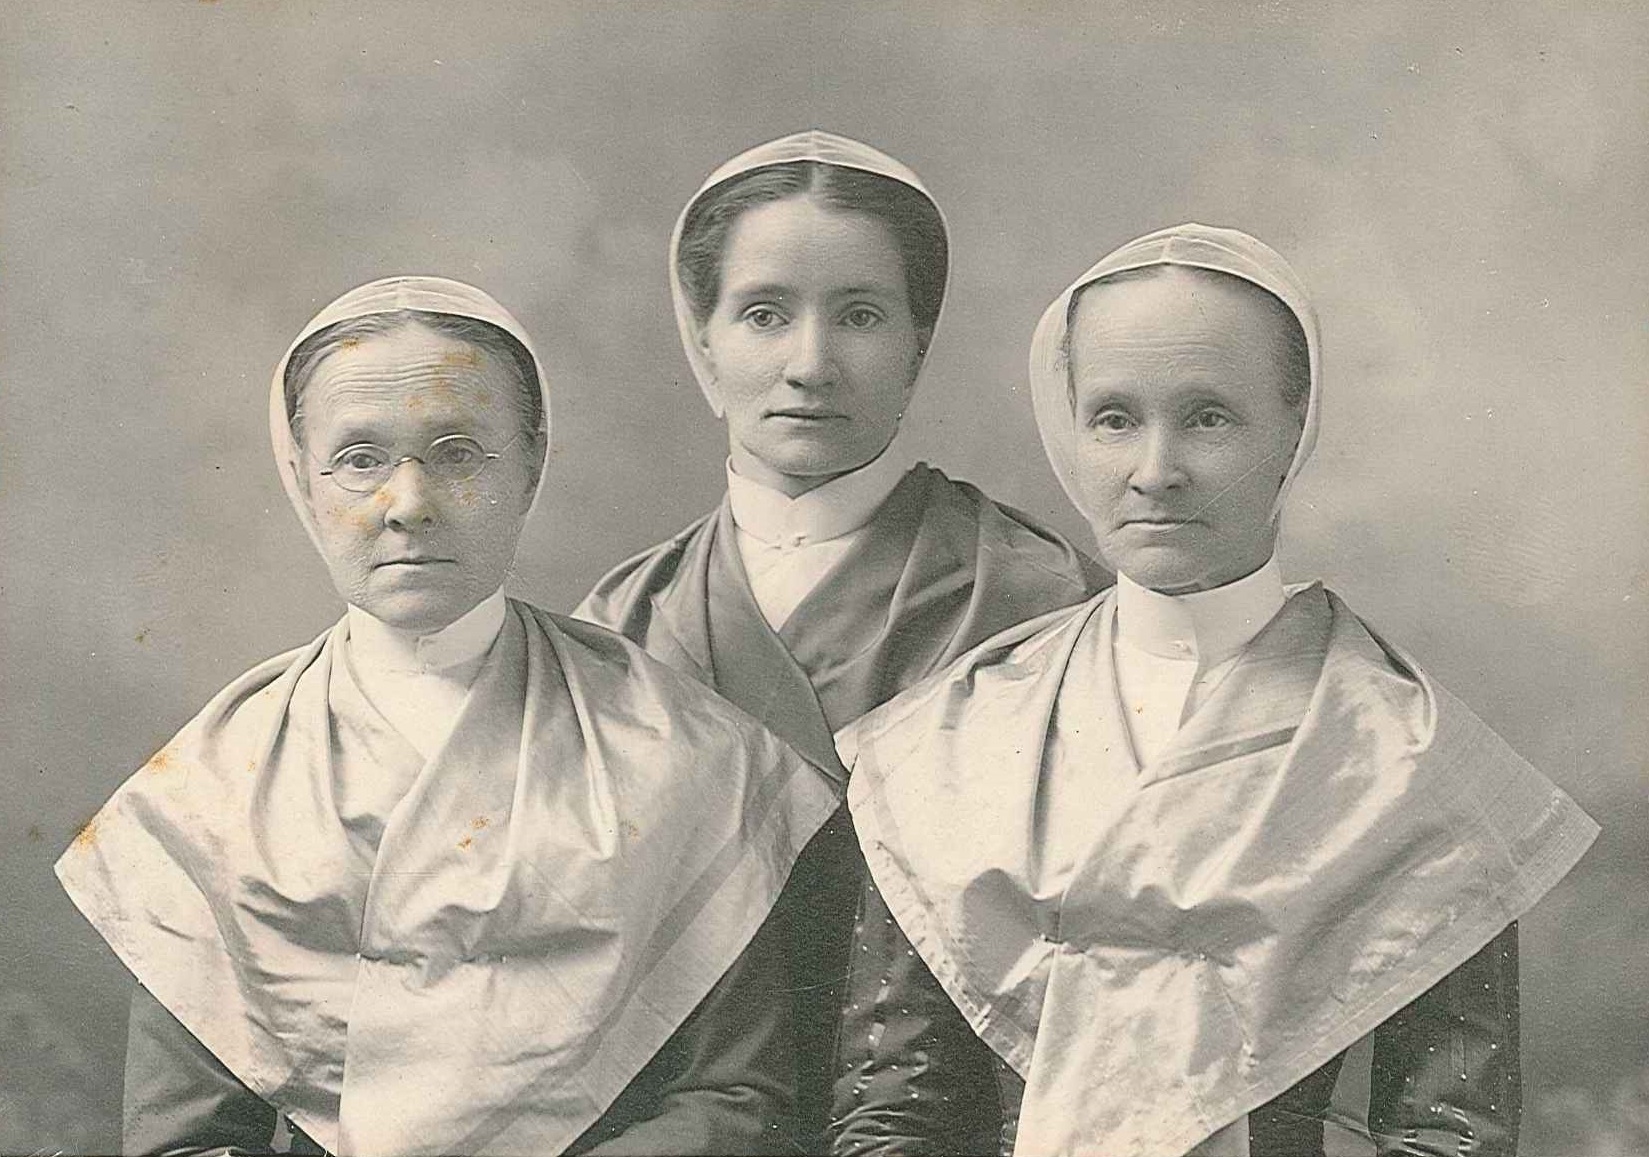 Three nuns posing for an old photo.